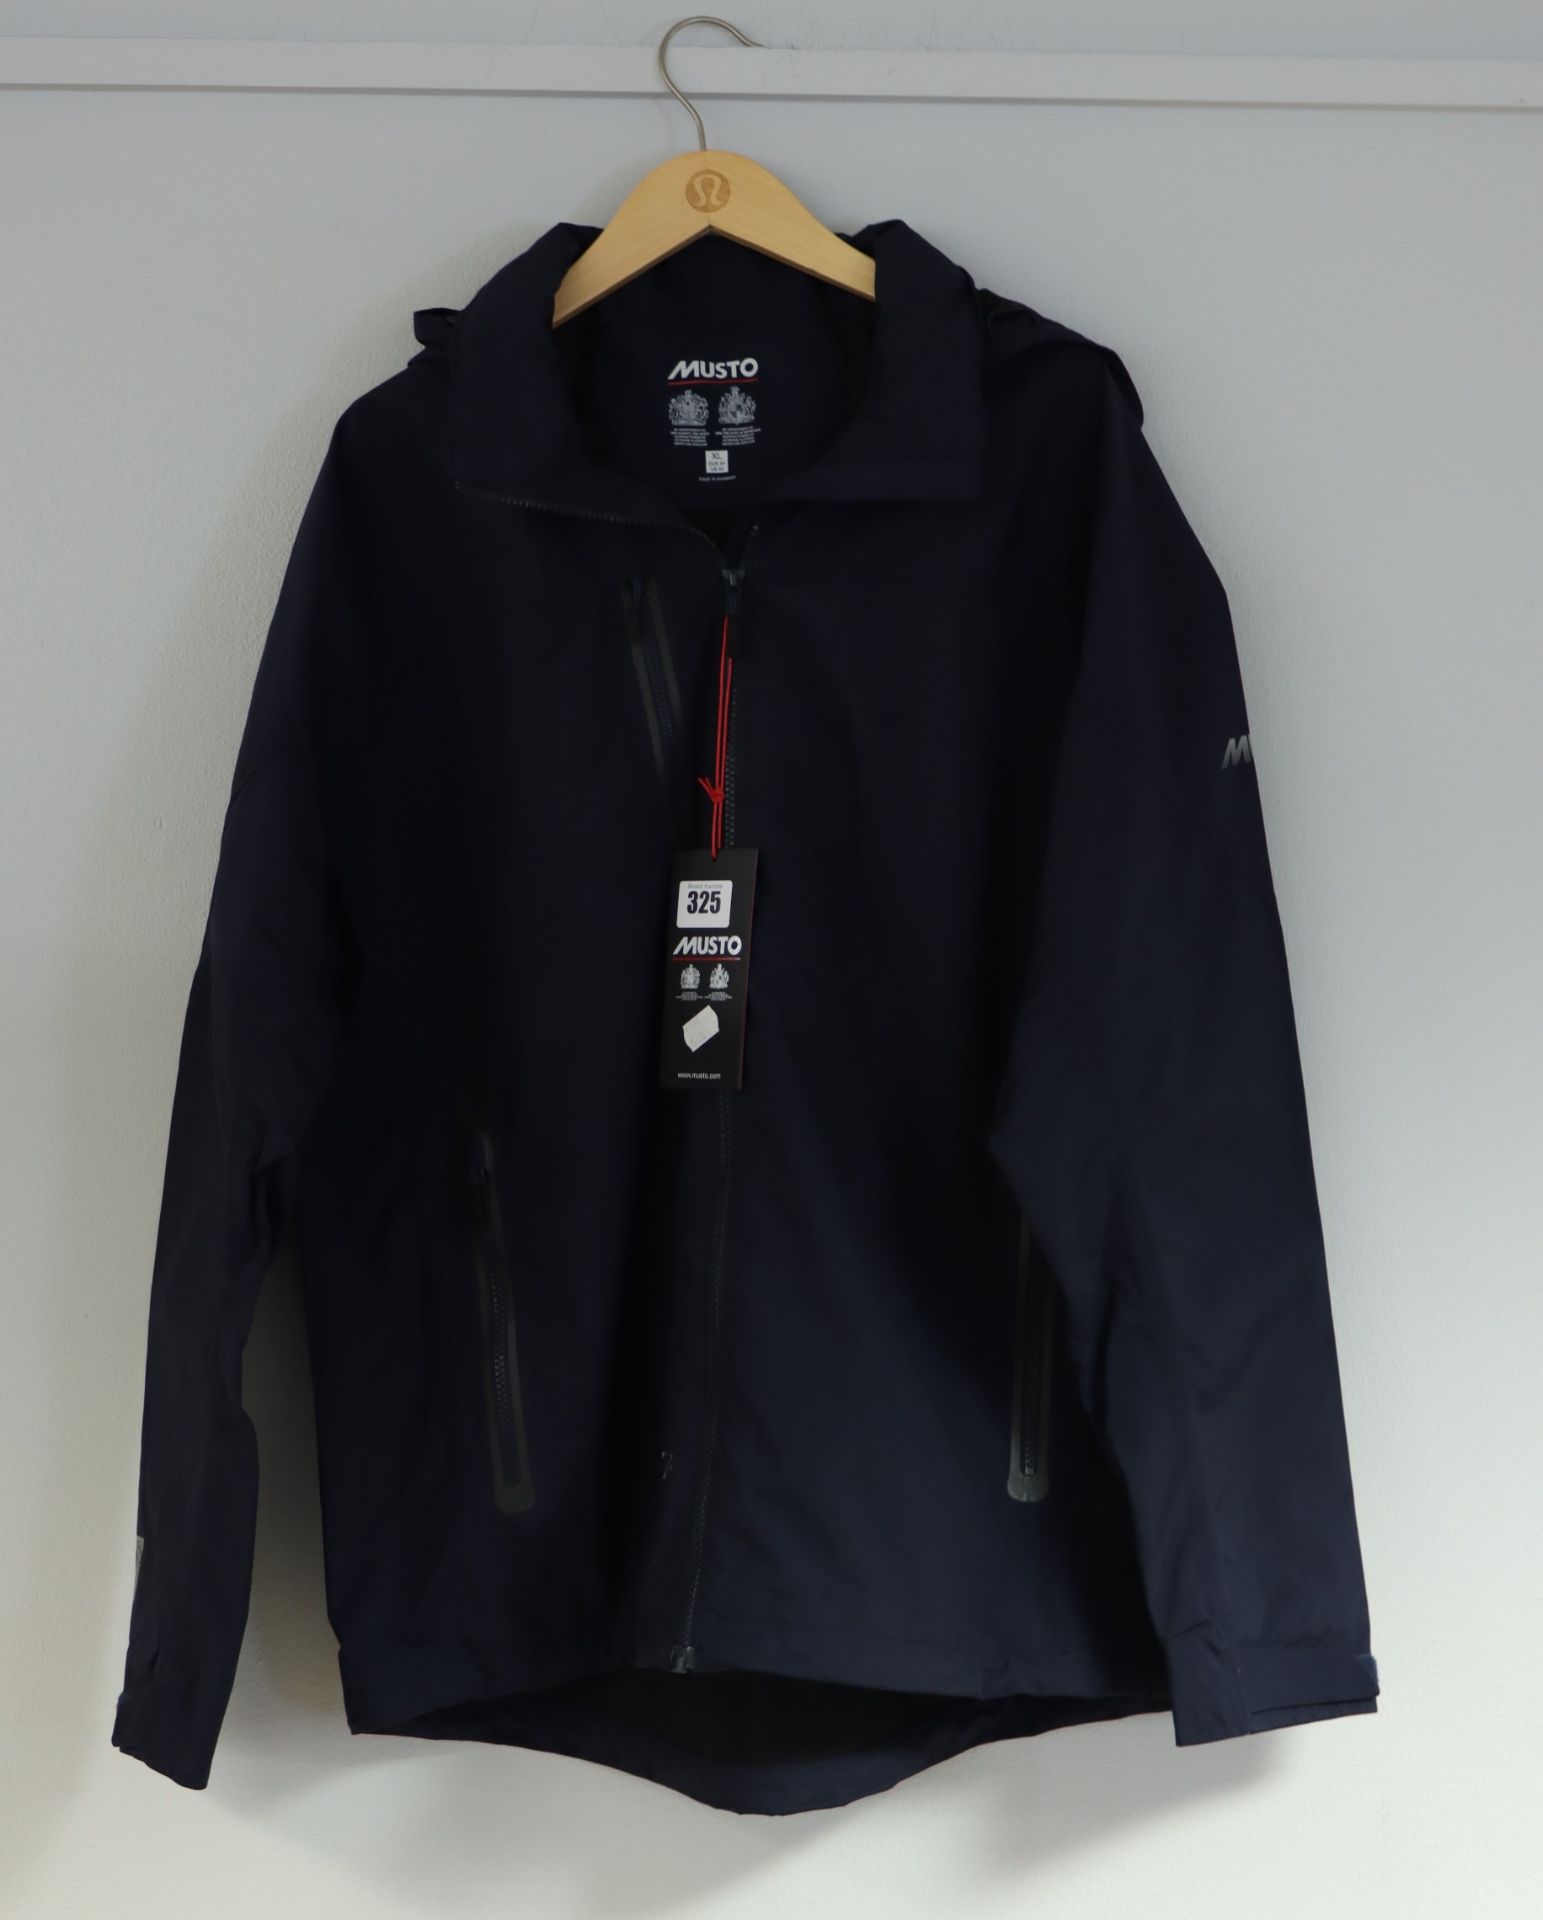 One as new Musto Sardinia BR1 sailing jacket in navy (SMJK057, XL).